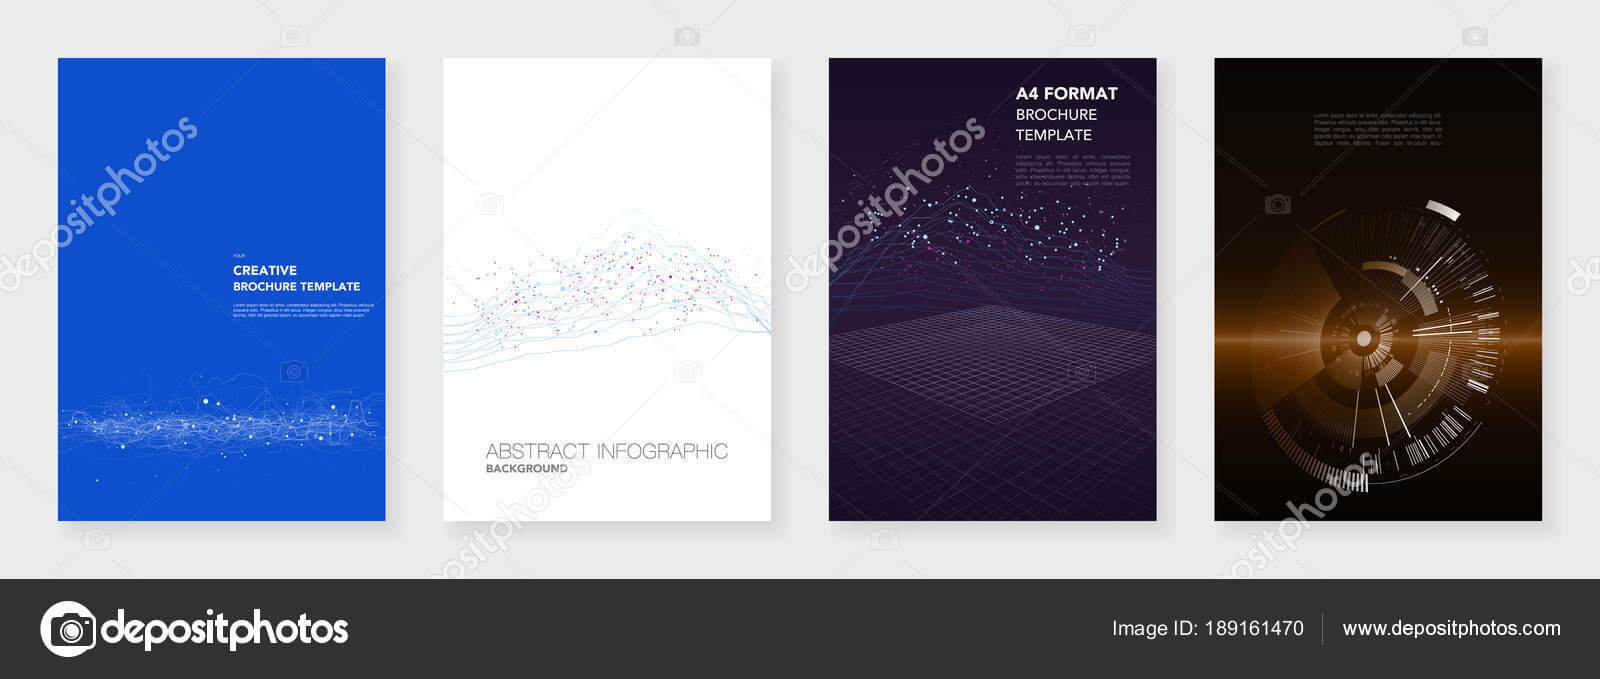 Minimal Brochure Templates. Big Data Visualization With Within Technical Brochure Template